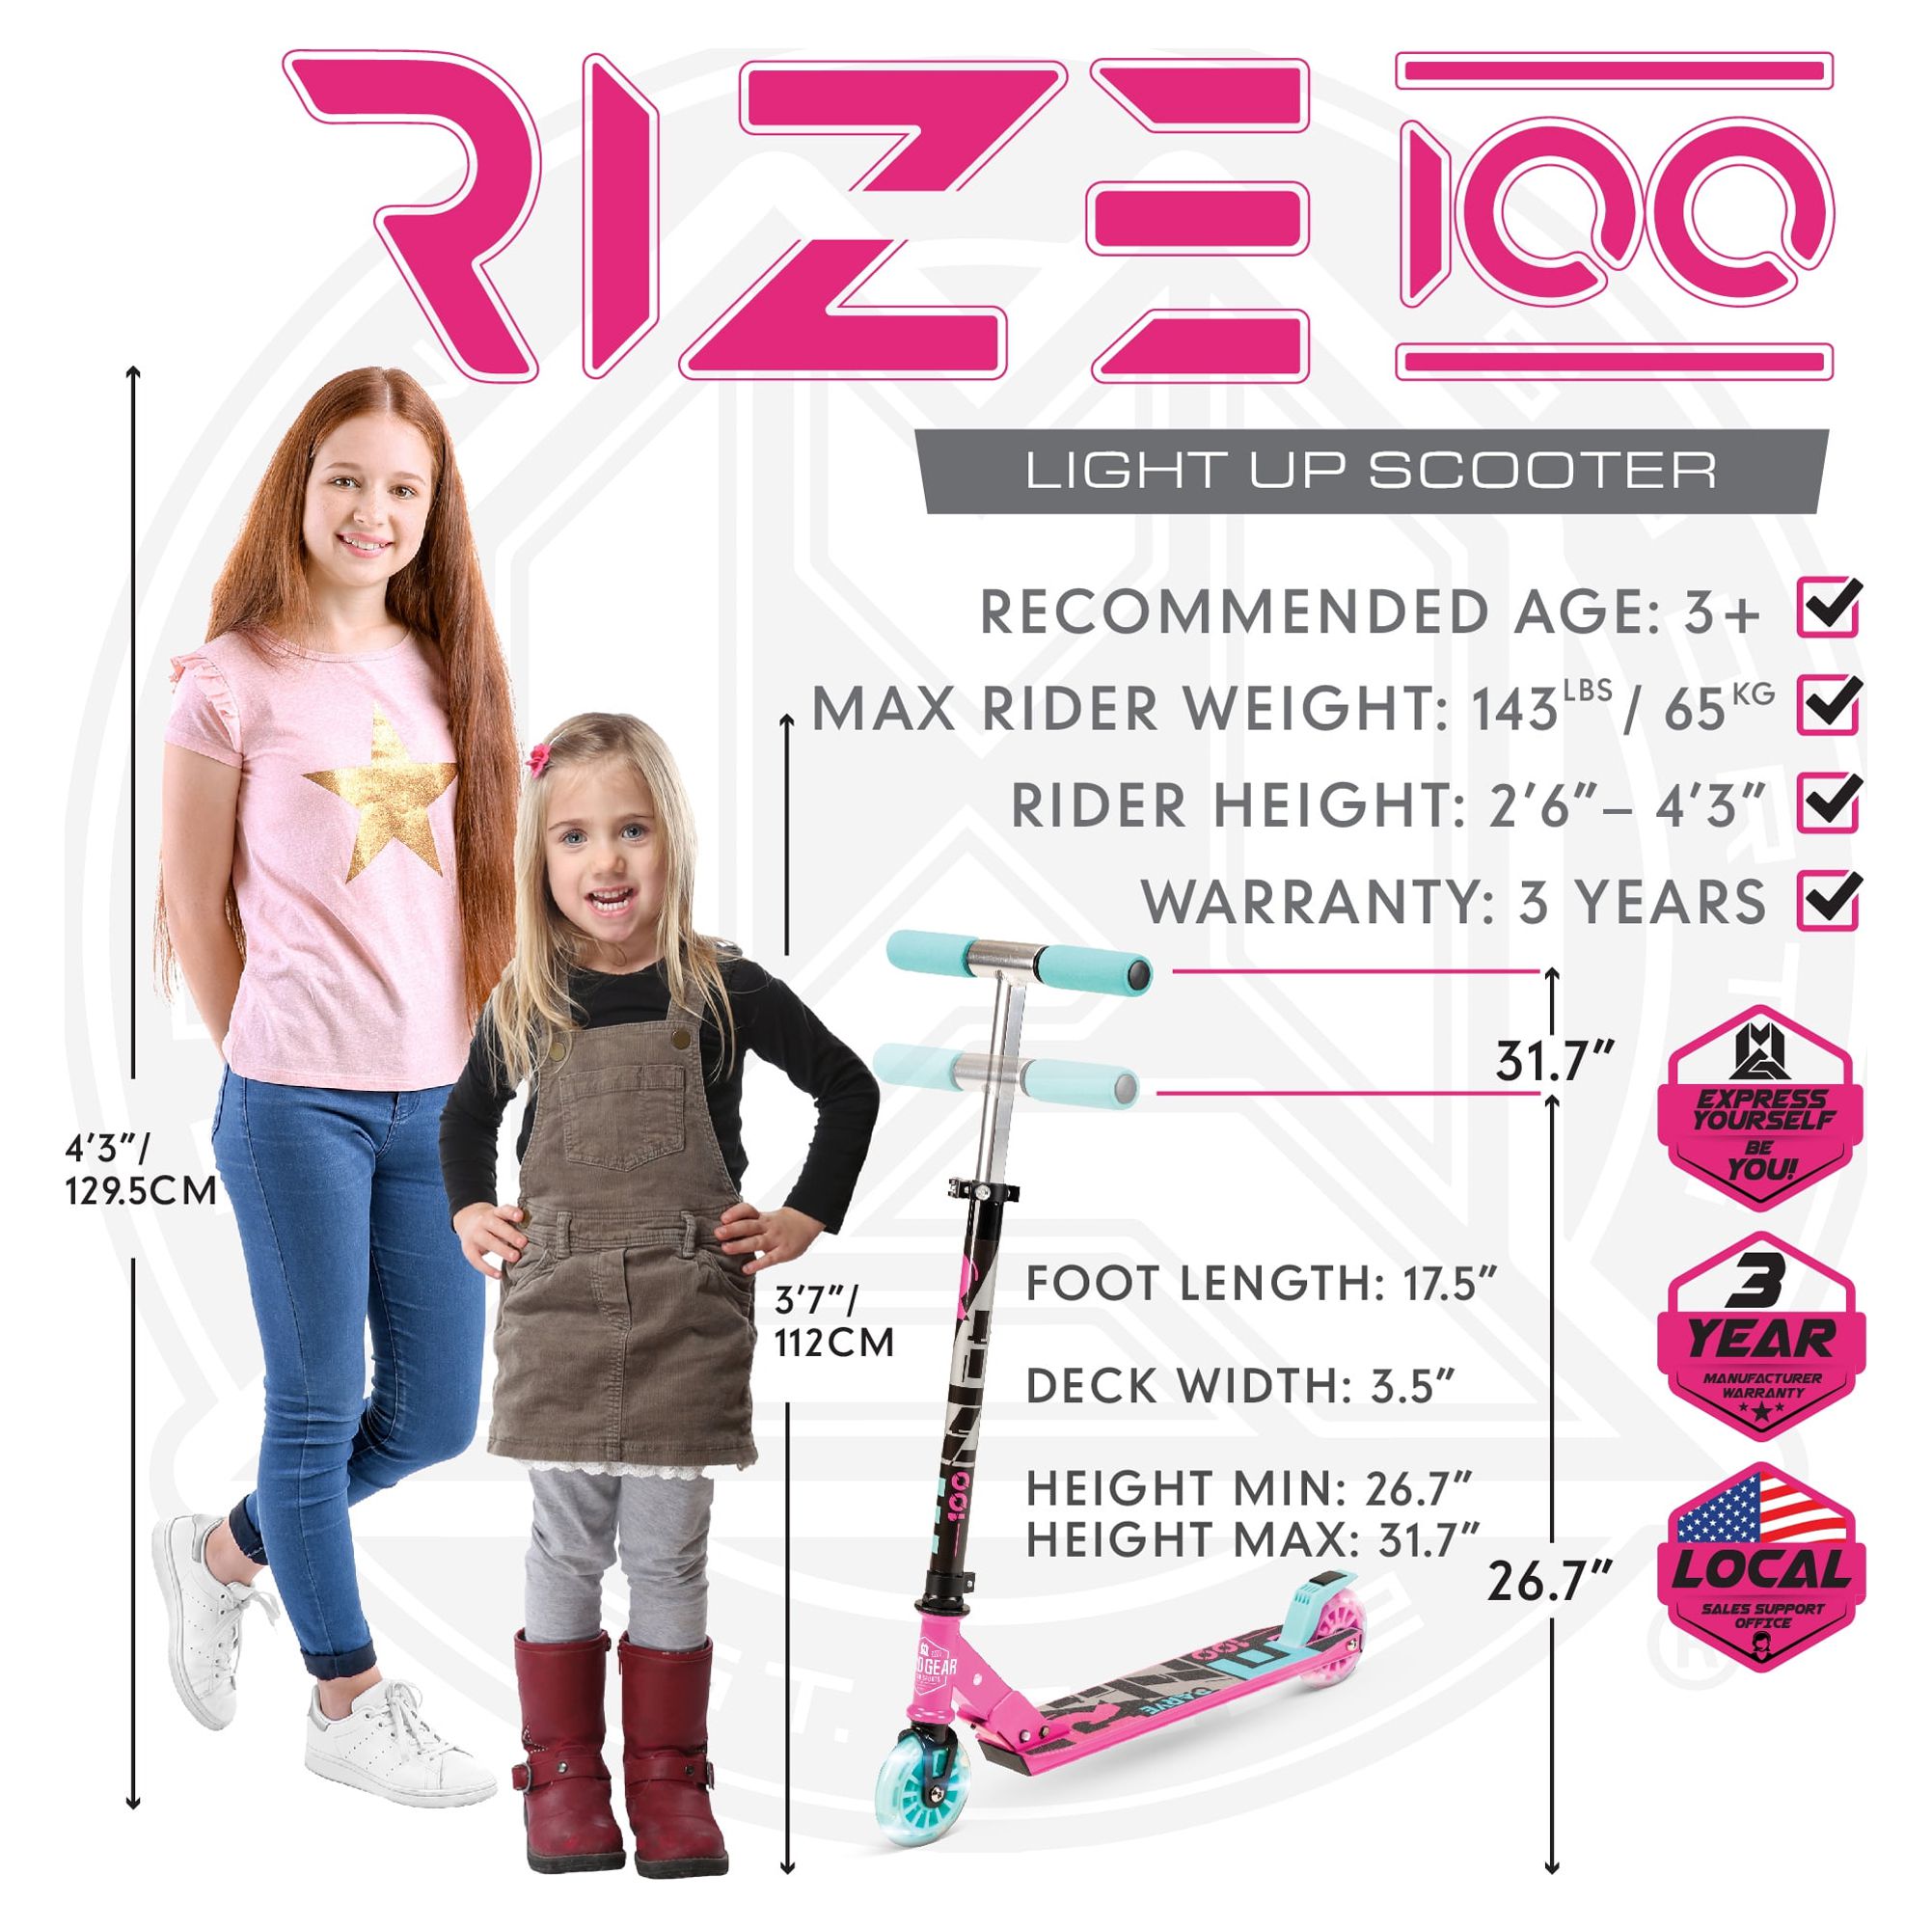 Madd Gear Rize 100 Light-Up Scooter - Pink Teal - image 2 of 16